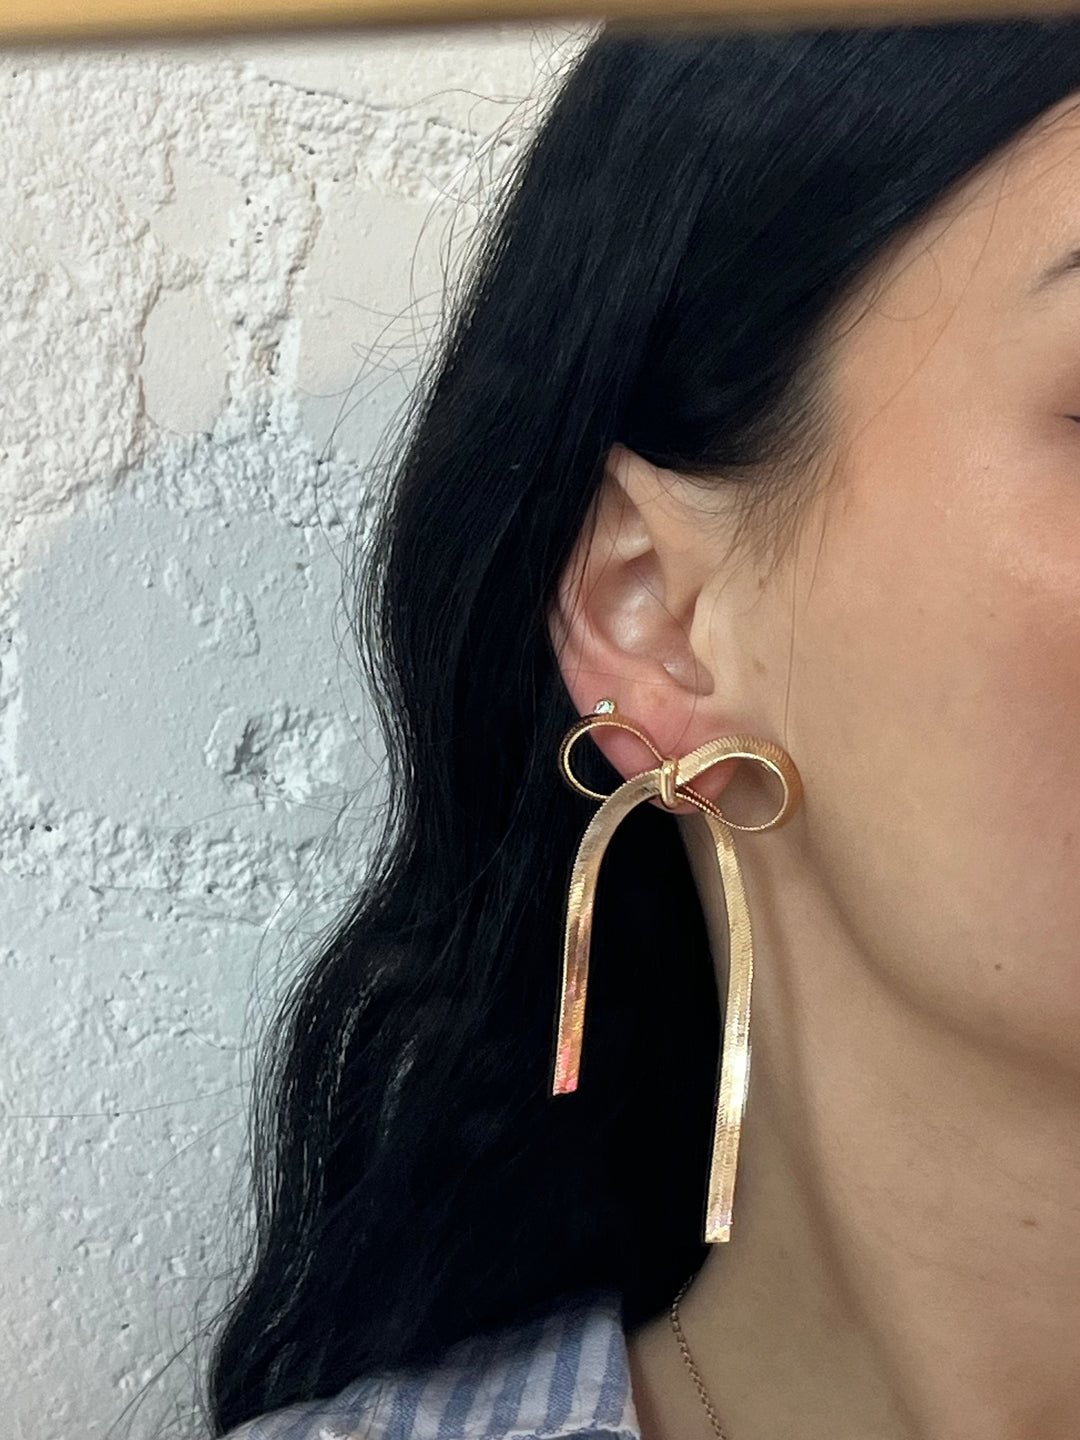 Bowie Bow Earring, Jewelry, Adeline, Adeline, dallas boutique, dallas texas, texas boutique, women's boutique dallas, adeline boutique, dallas boutique, trendy boutique, affordable boutique